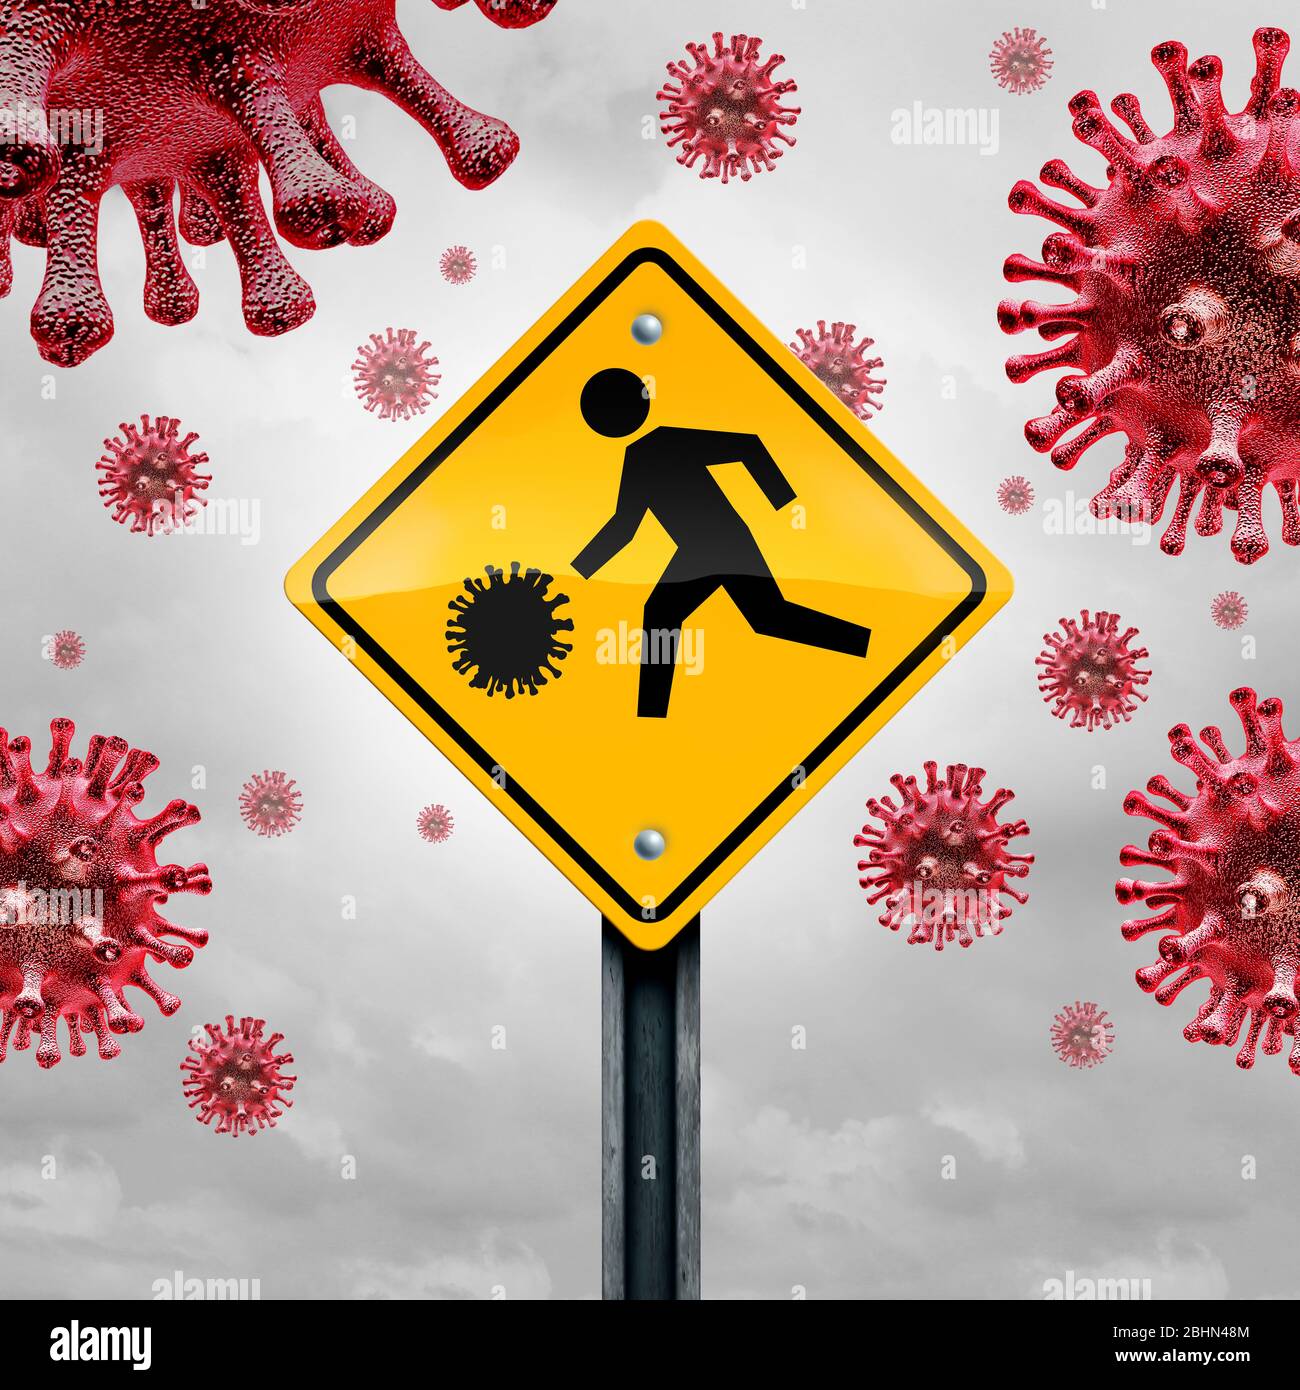 School and disease concept as a student traffic sign with a virus cell as a warning for  flu or coronavirus and Covid-19 outbreak in schools. Stock Photo